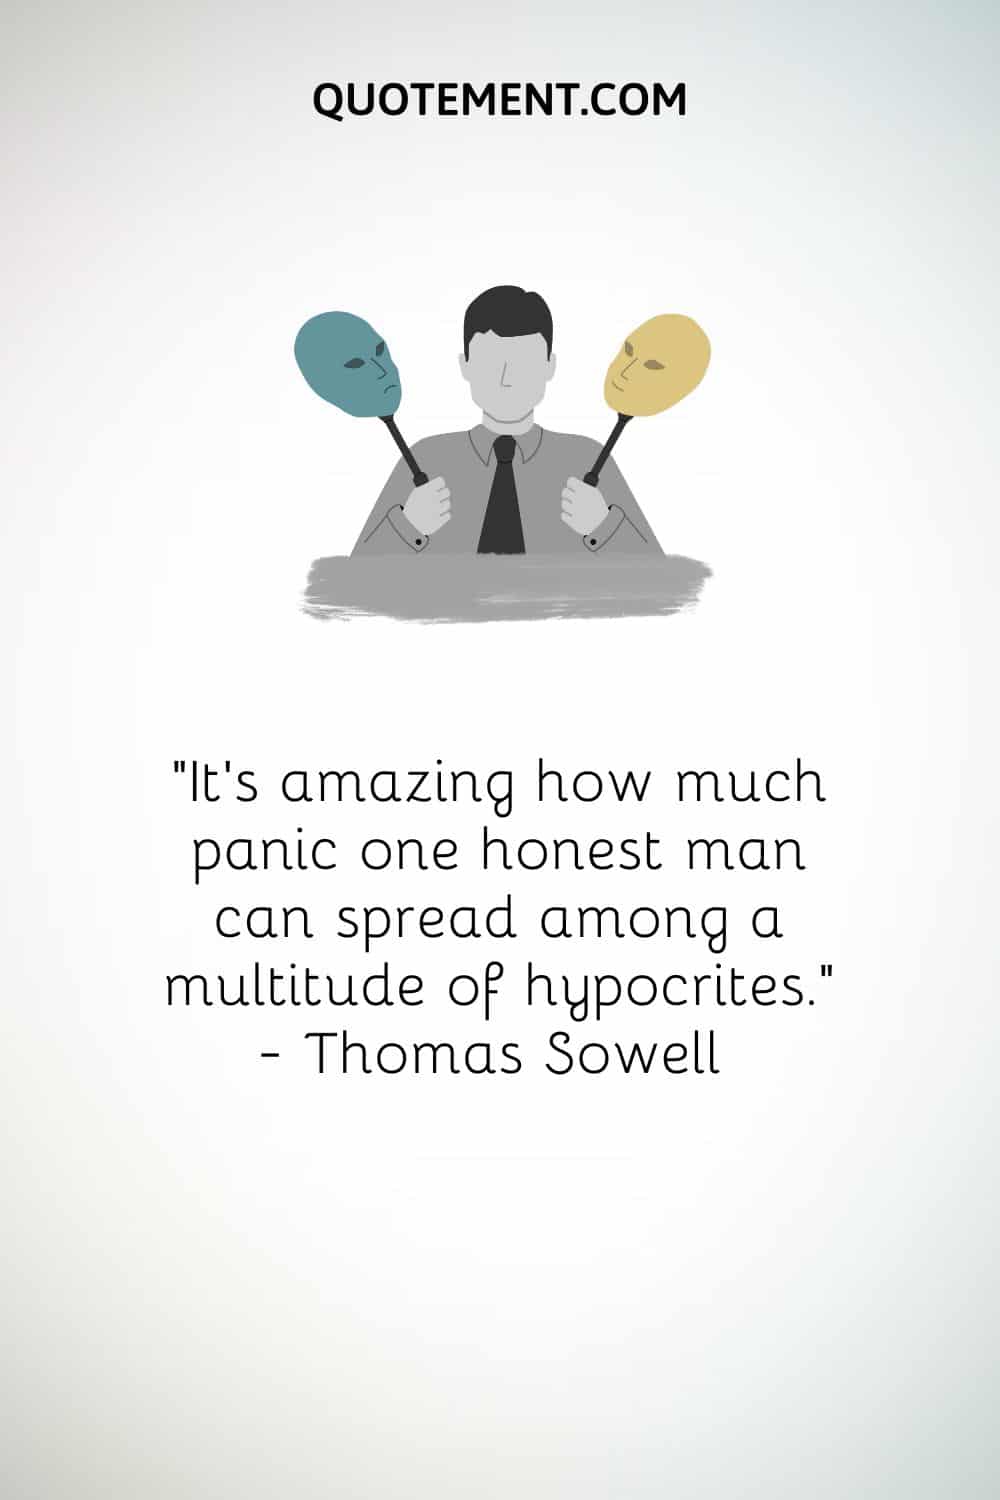 “It’s amazing how much panic one honest man can spread among a multitude of hypocrites.” — Thomas Sowell